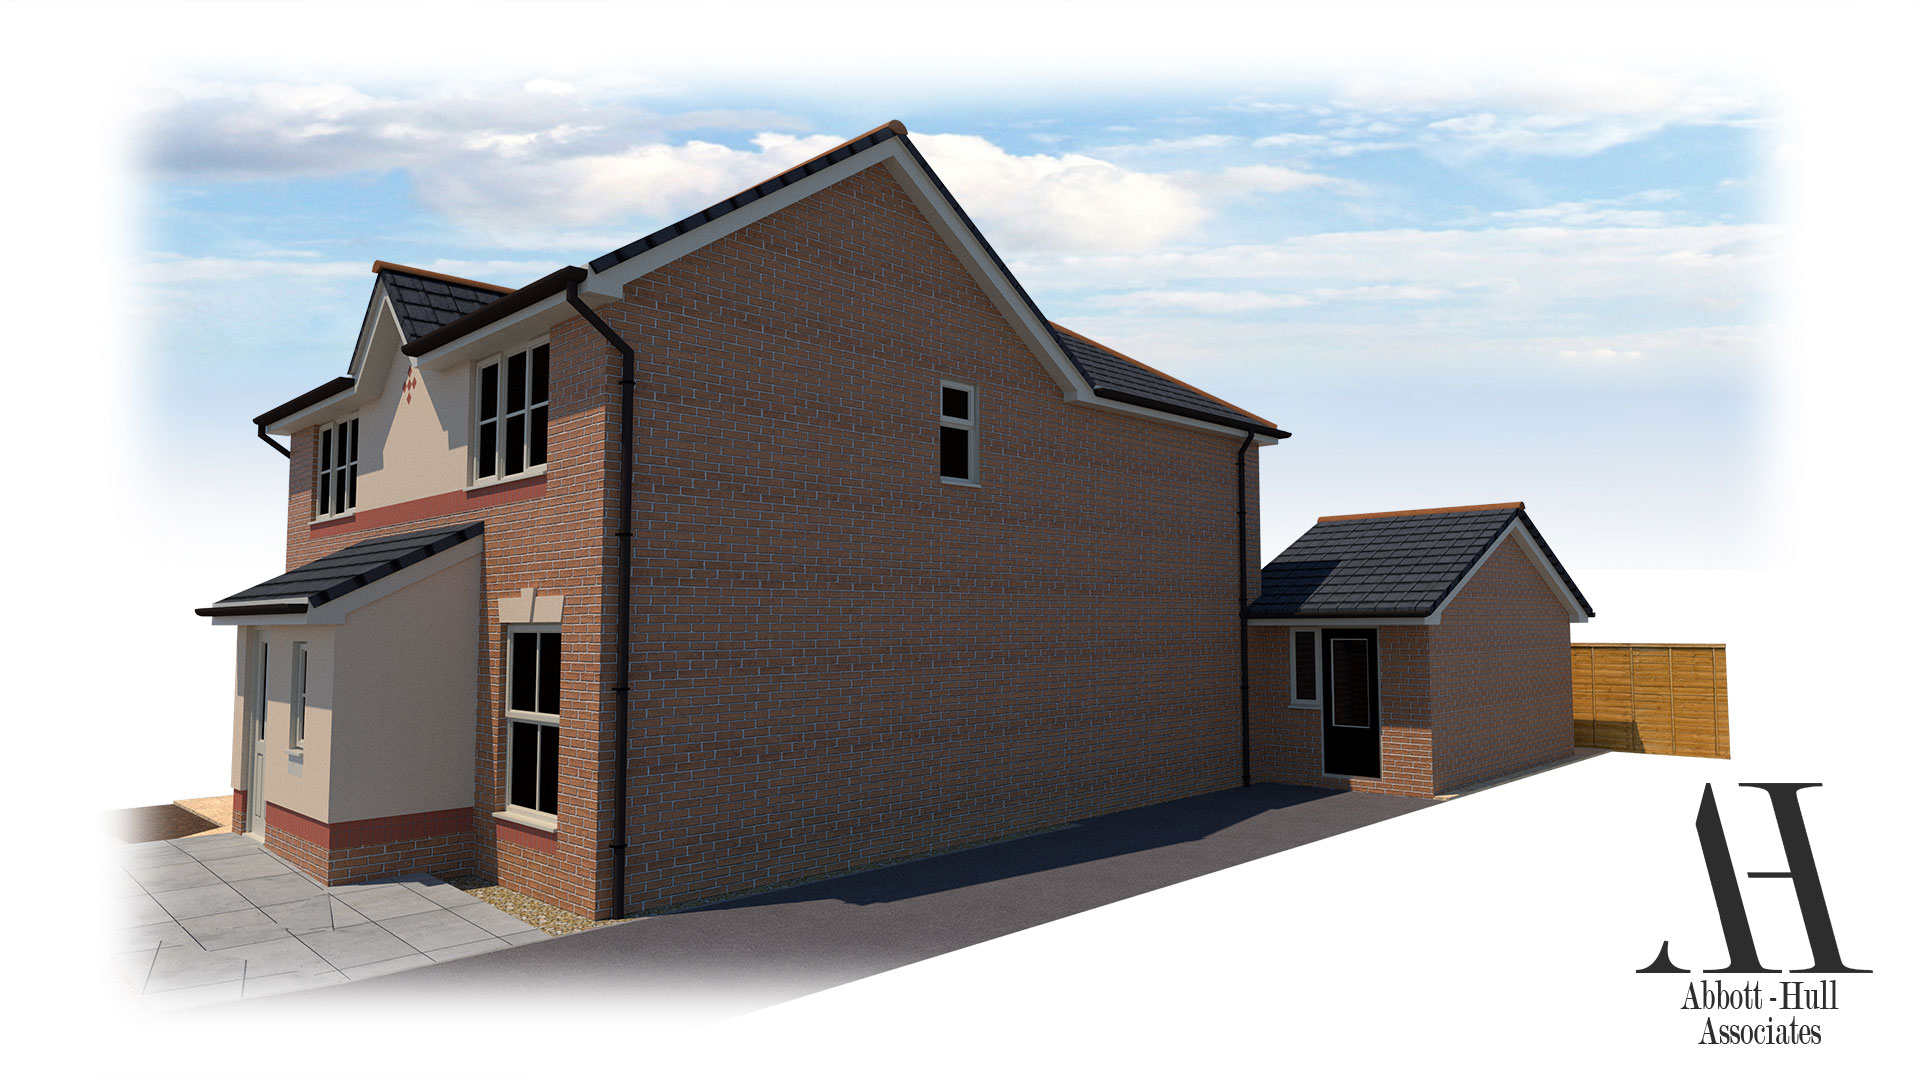 Dallem Dell, Thornton-Cleveleys, House Extension - Proposed Visual B